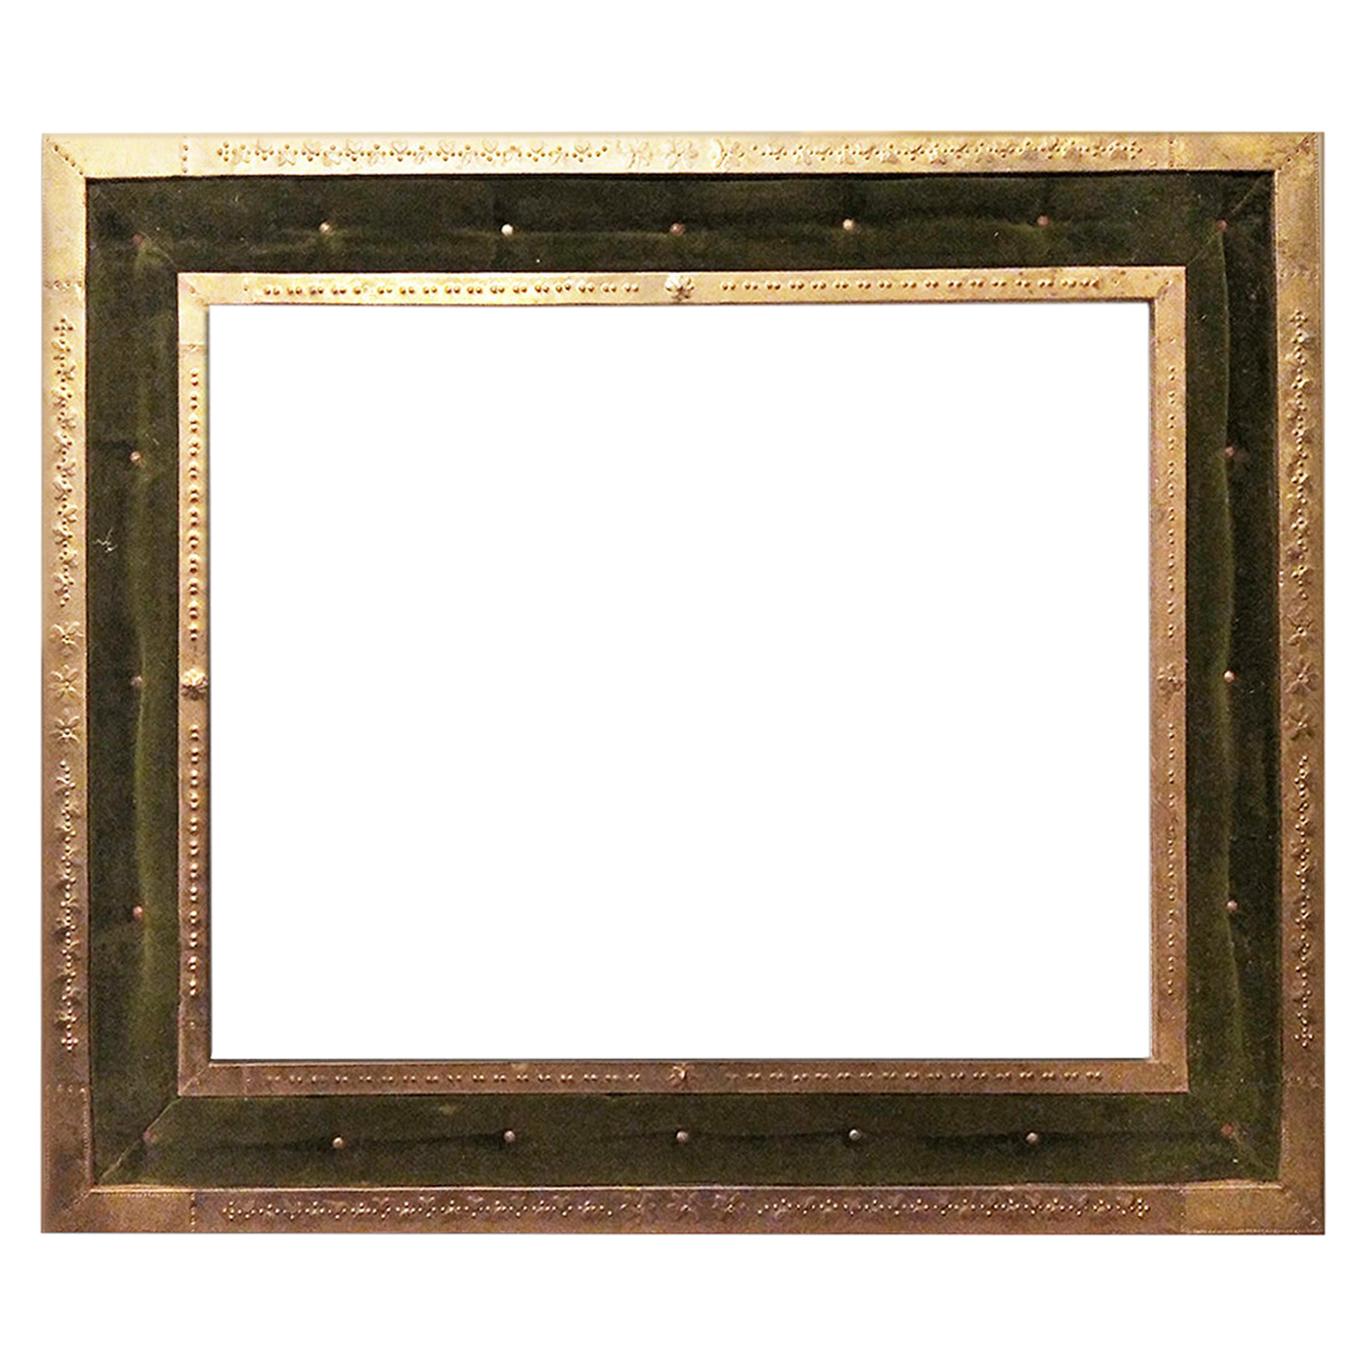  Original Large Frame Brass and Velved White Capitone, Victorian